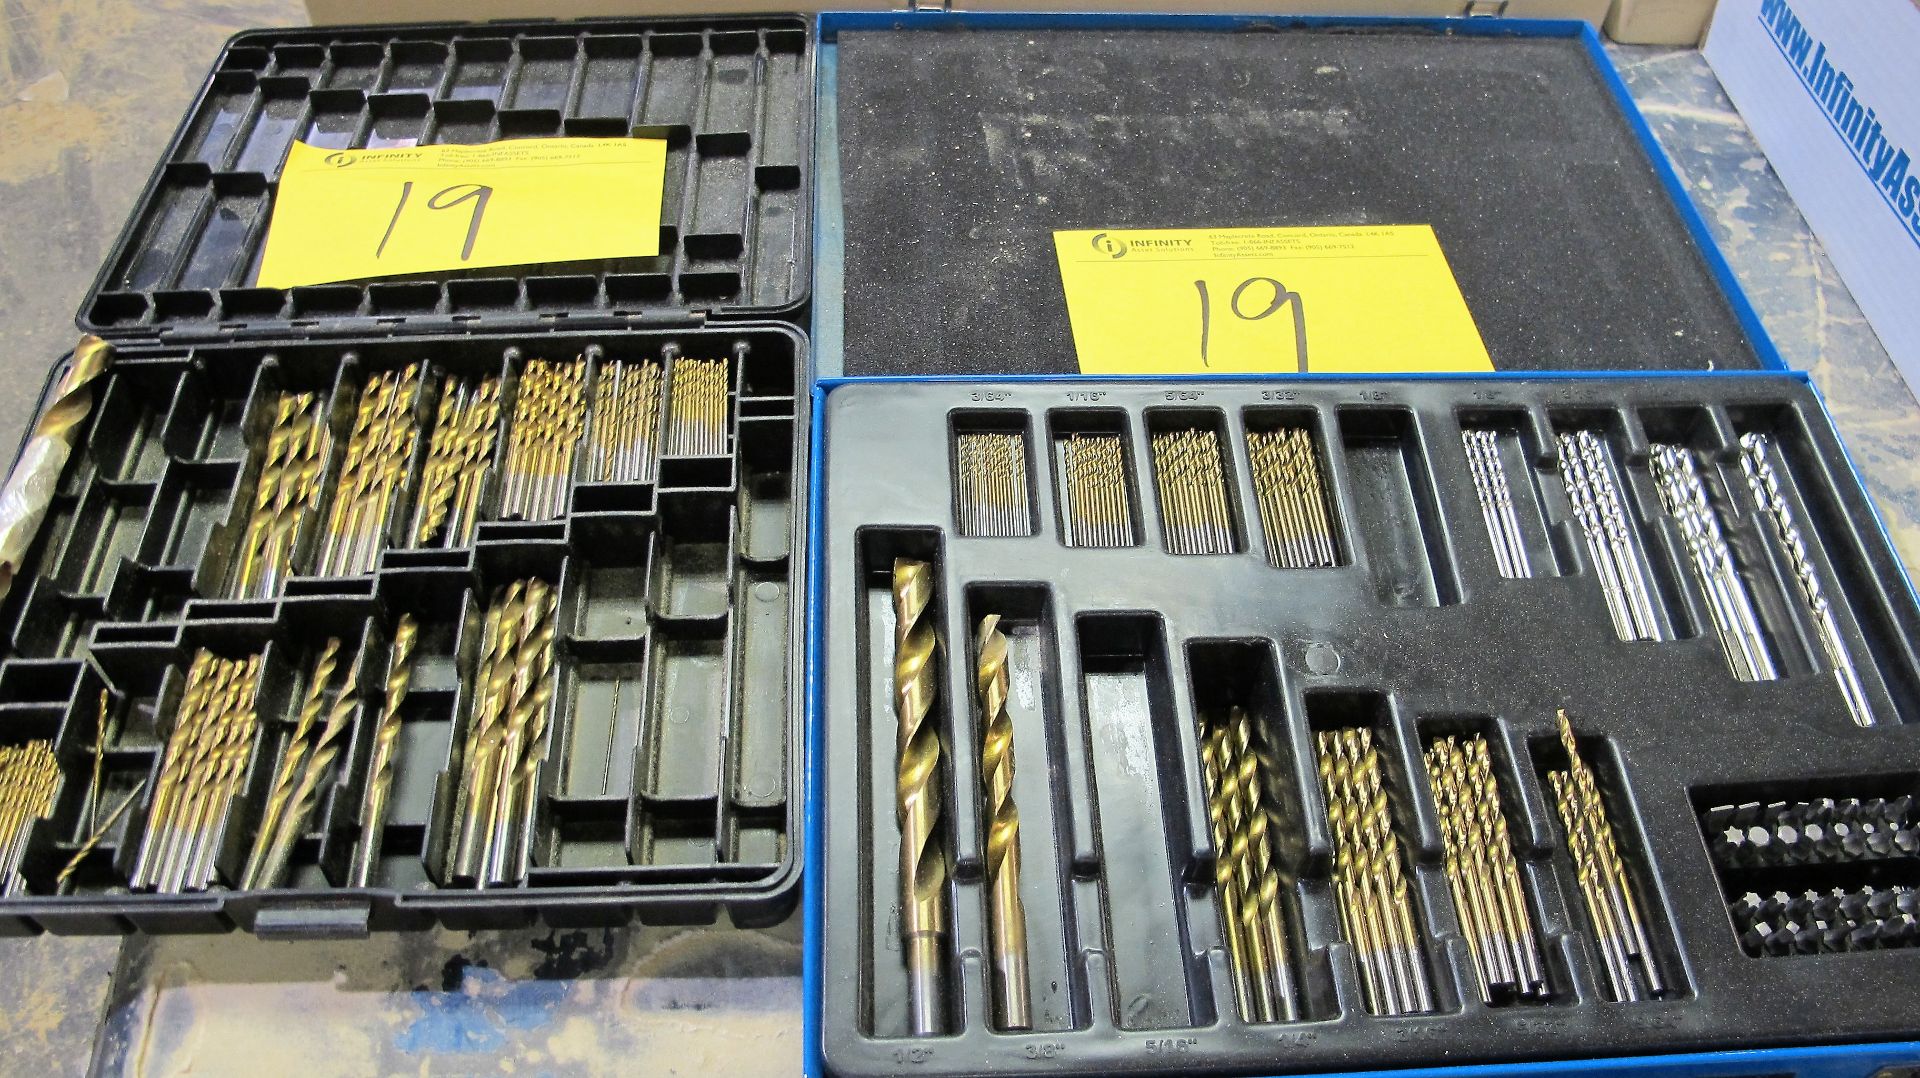 LOT OF ASST. DRILL BITS, CUTTERS, ETC. - Image 2 of 3